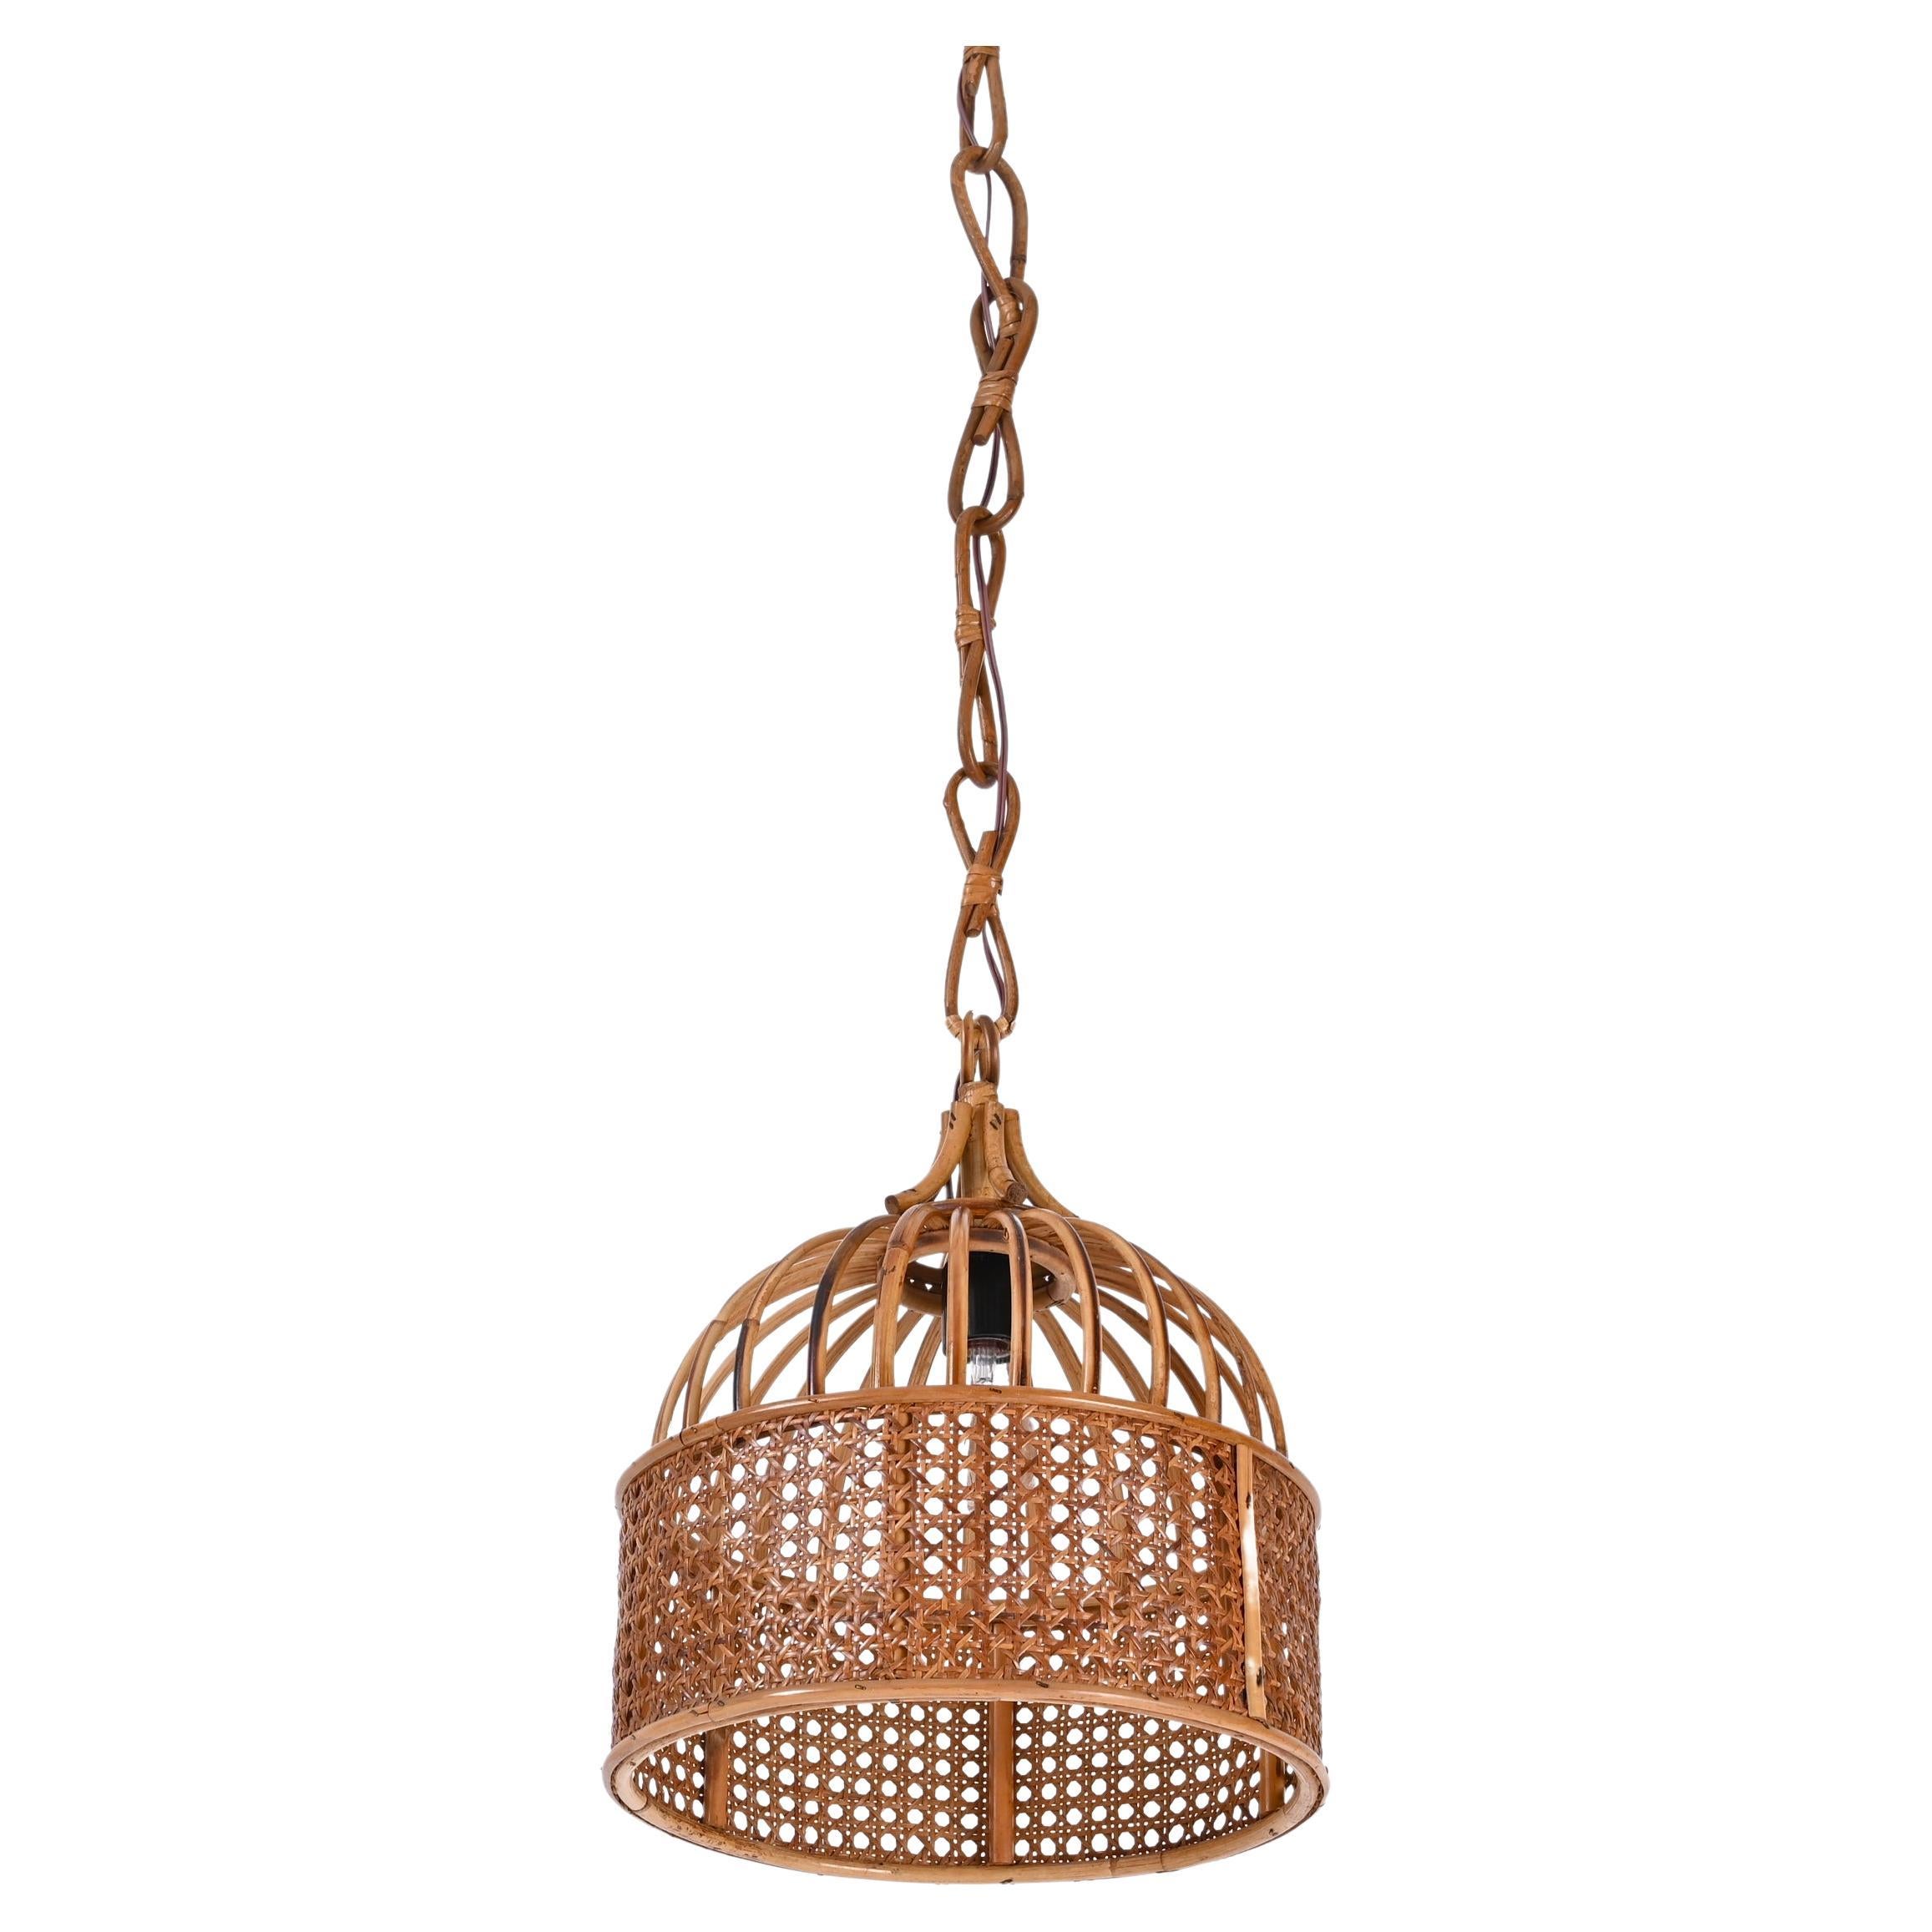 Midcentury French Riviera Round Pendant in Rattan and Wicker, Italy 1970s For Sale